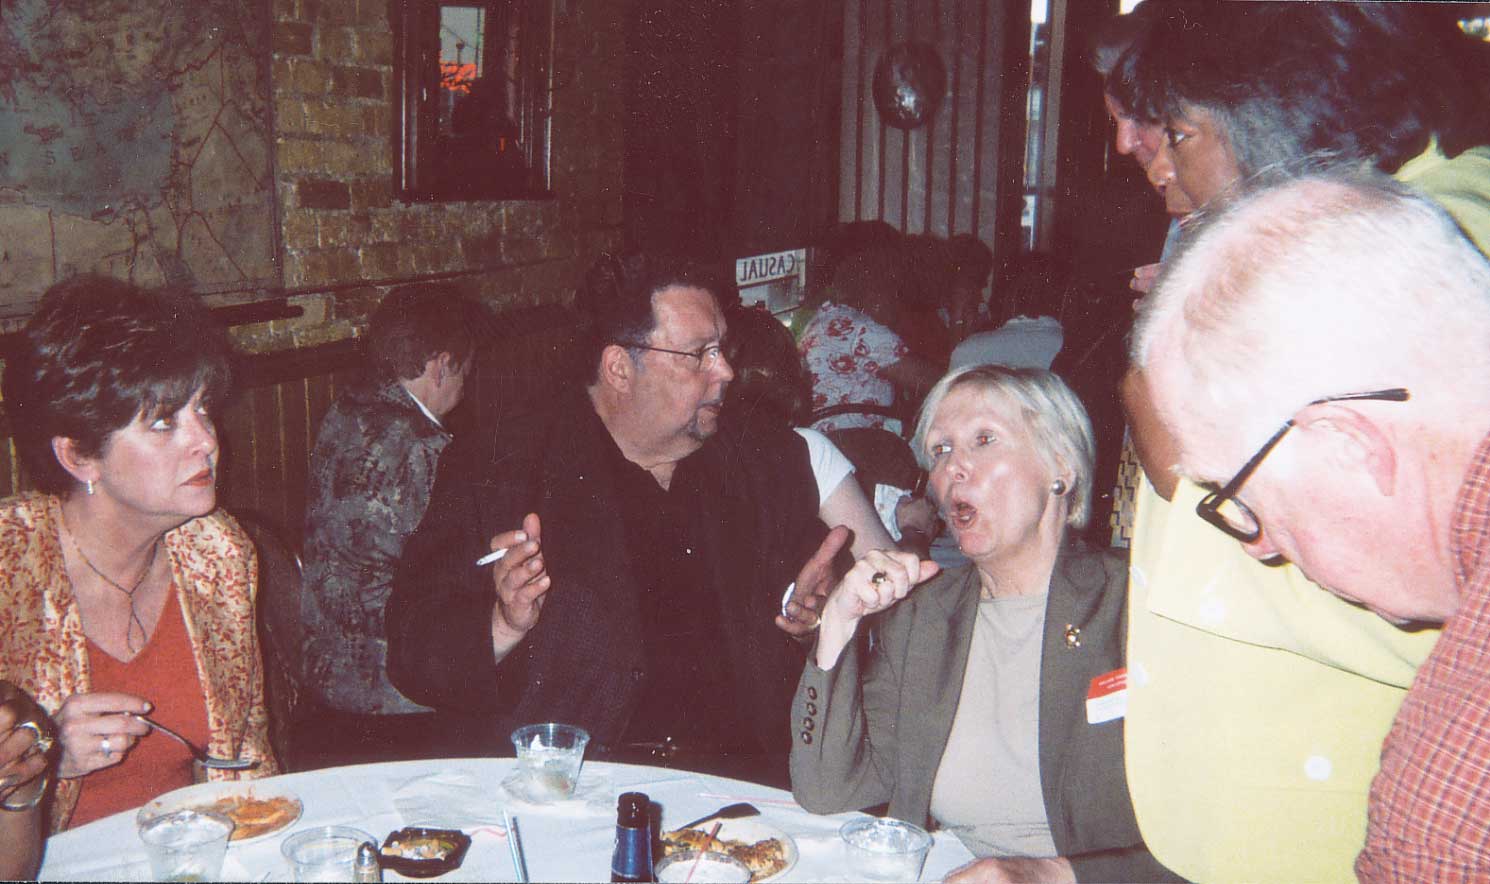 In her May report on the precarious financial situation of the Chicago Teachers Union, CTU President Marilyn Stewart (partly obscured, above right behind former CTU research chief Tom Feeley, far right) spared no blame in reviewing the history of the union.
<br />According to Stewart, her three predecessors (Jacqueline Vaughn, who died in 1994; Tom Reece (above, center), who served from 1994 to 2001; and Deborah Lynch, who served from 2001 until August 2004) were mainly to blame. According to Stewart, the three previous presidents of the CTU caused a deficit that required that the union borrow $3 million in the past seven months. In addition to blaming the venerated CTU President Jacqueline Vaughn (1984 - 1994), who died in 1994, Stewart also blamed Vaughn’s successor Tom Reece (above, second from left), and, of course, Deborah Lynch, whom she had blamed for just about everything during her first term in office.
<br />Stewart’s version of reality is that Vaughn and Reece initiated 